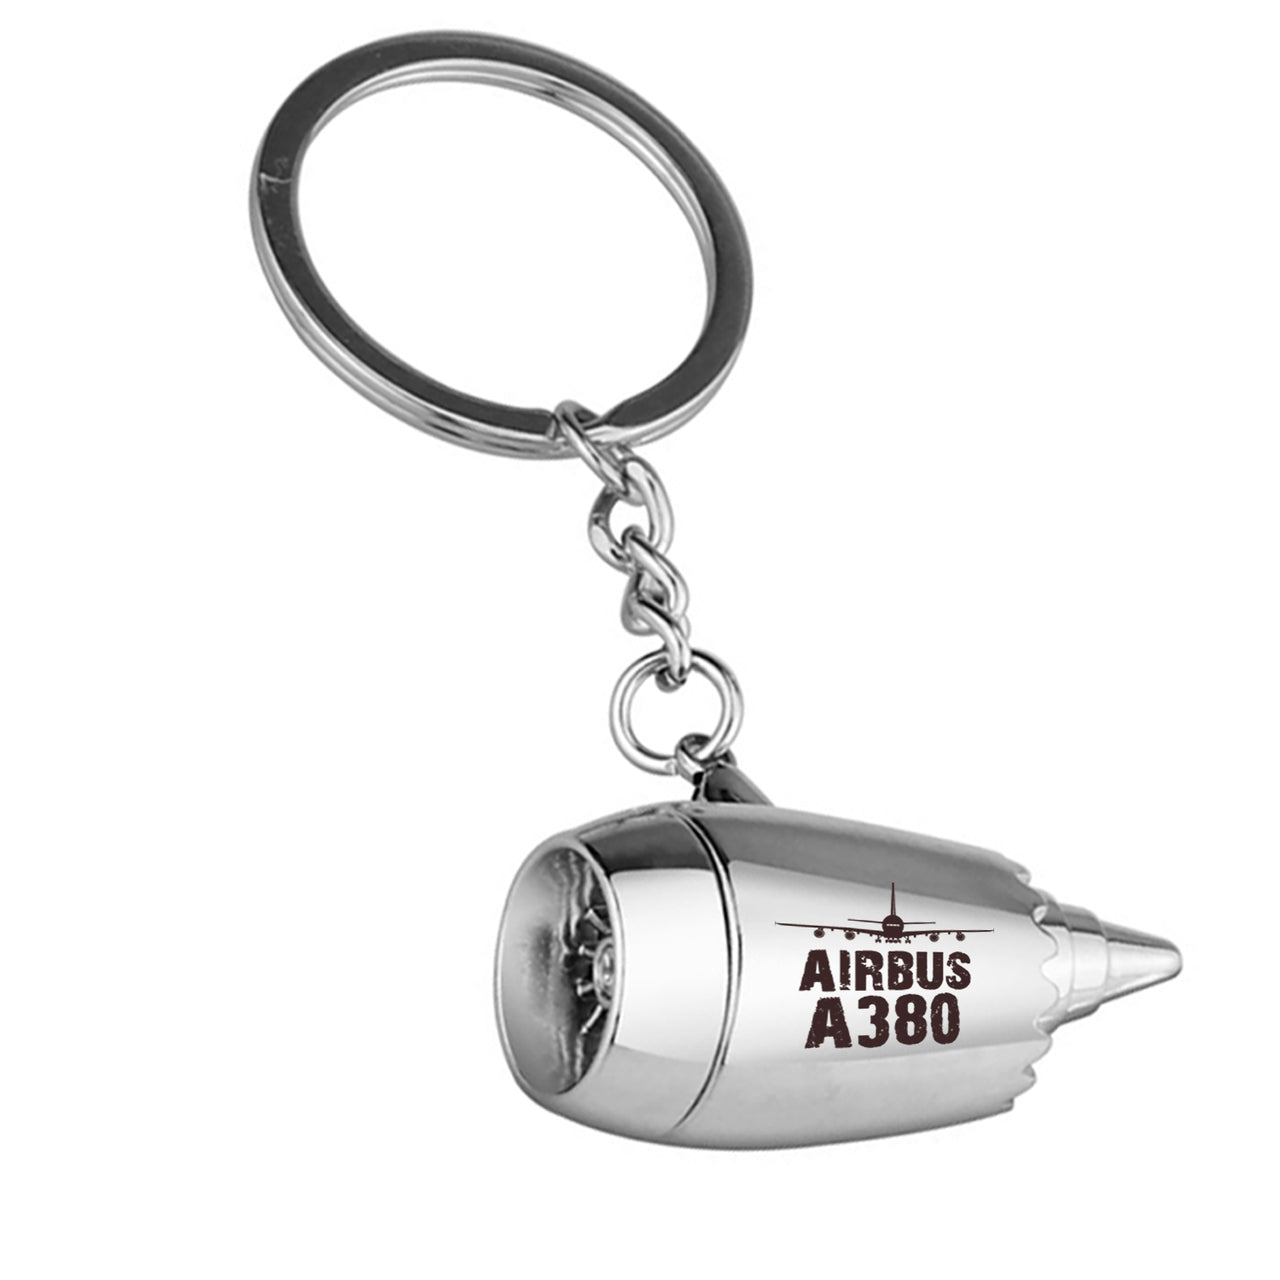 Airbus A380 & Plane Designed Airplane Jet Engine Shaped Key Chain